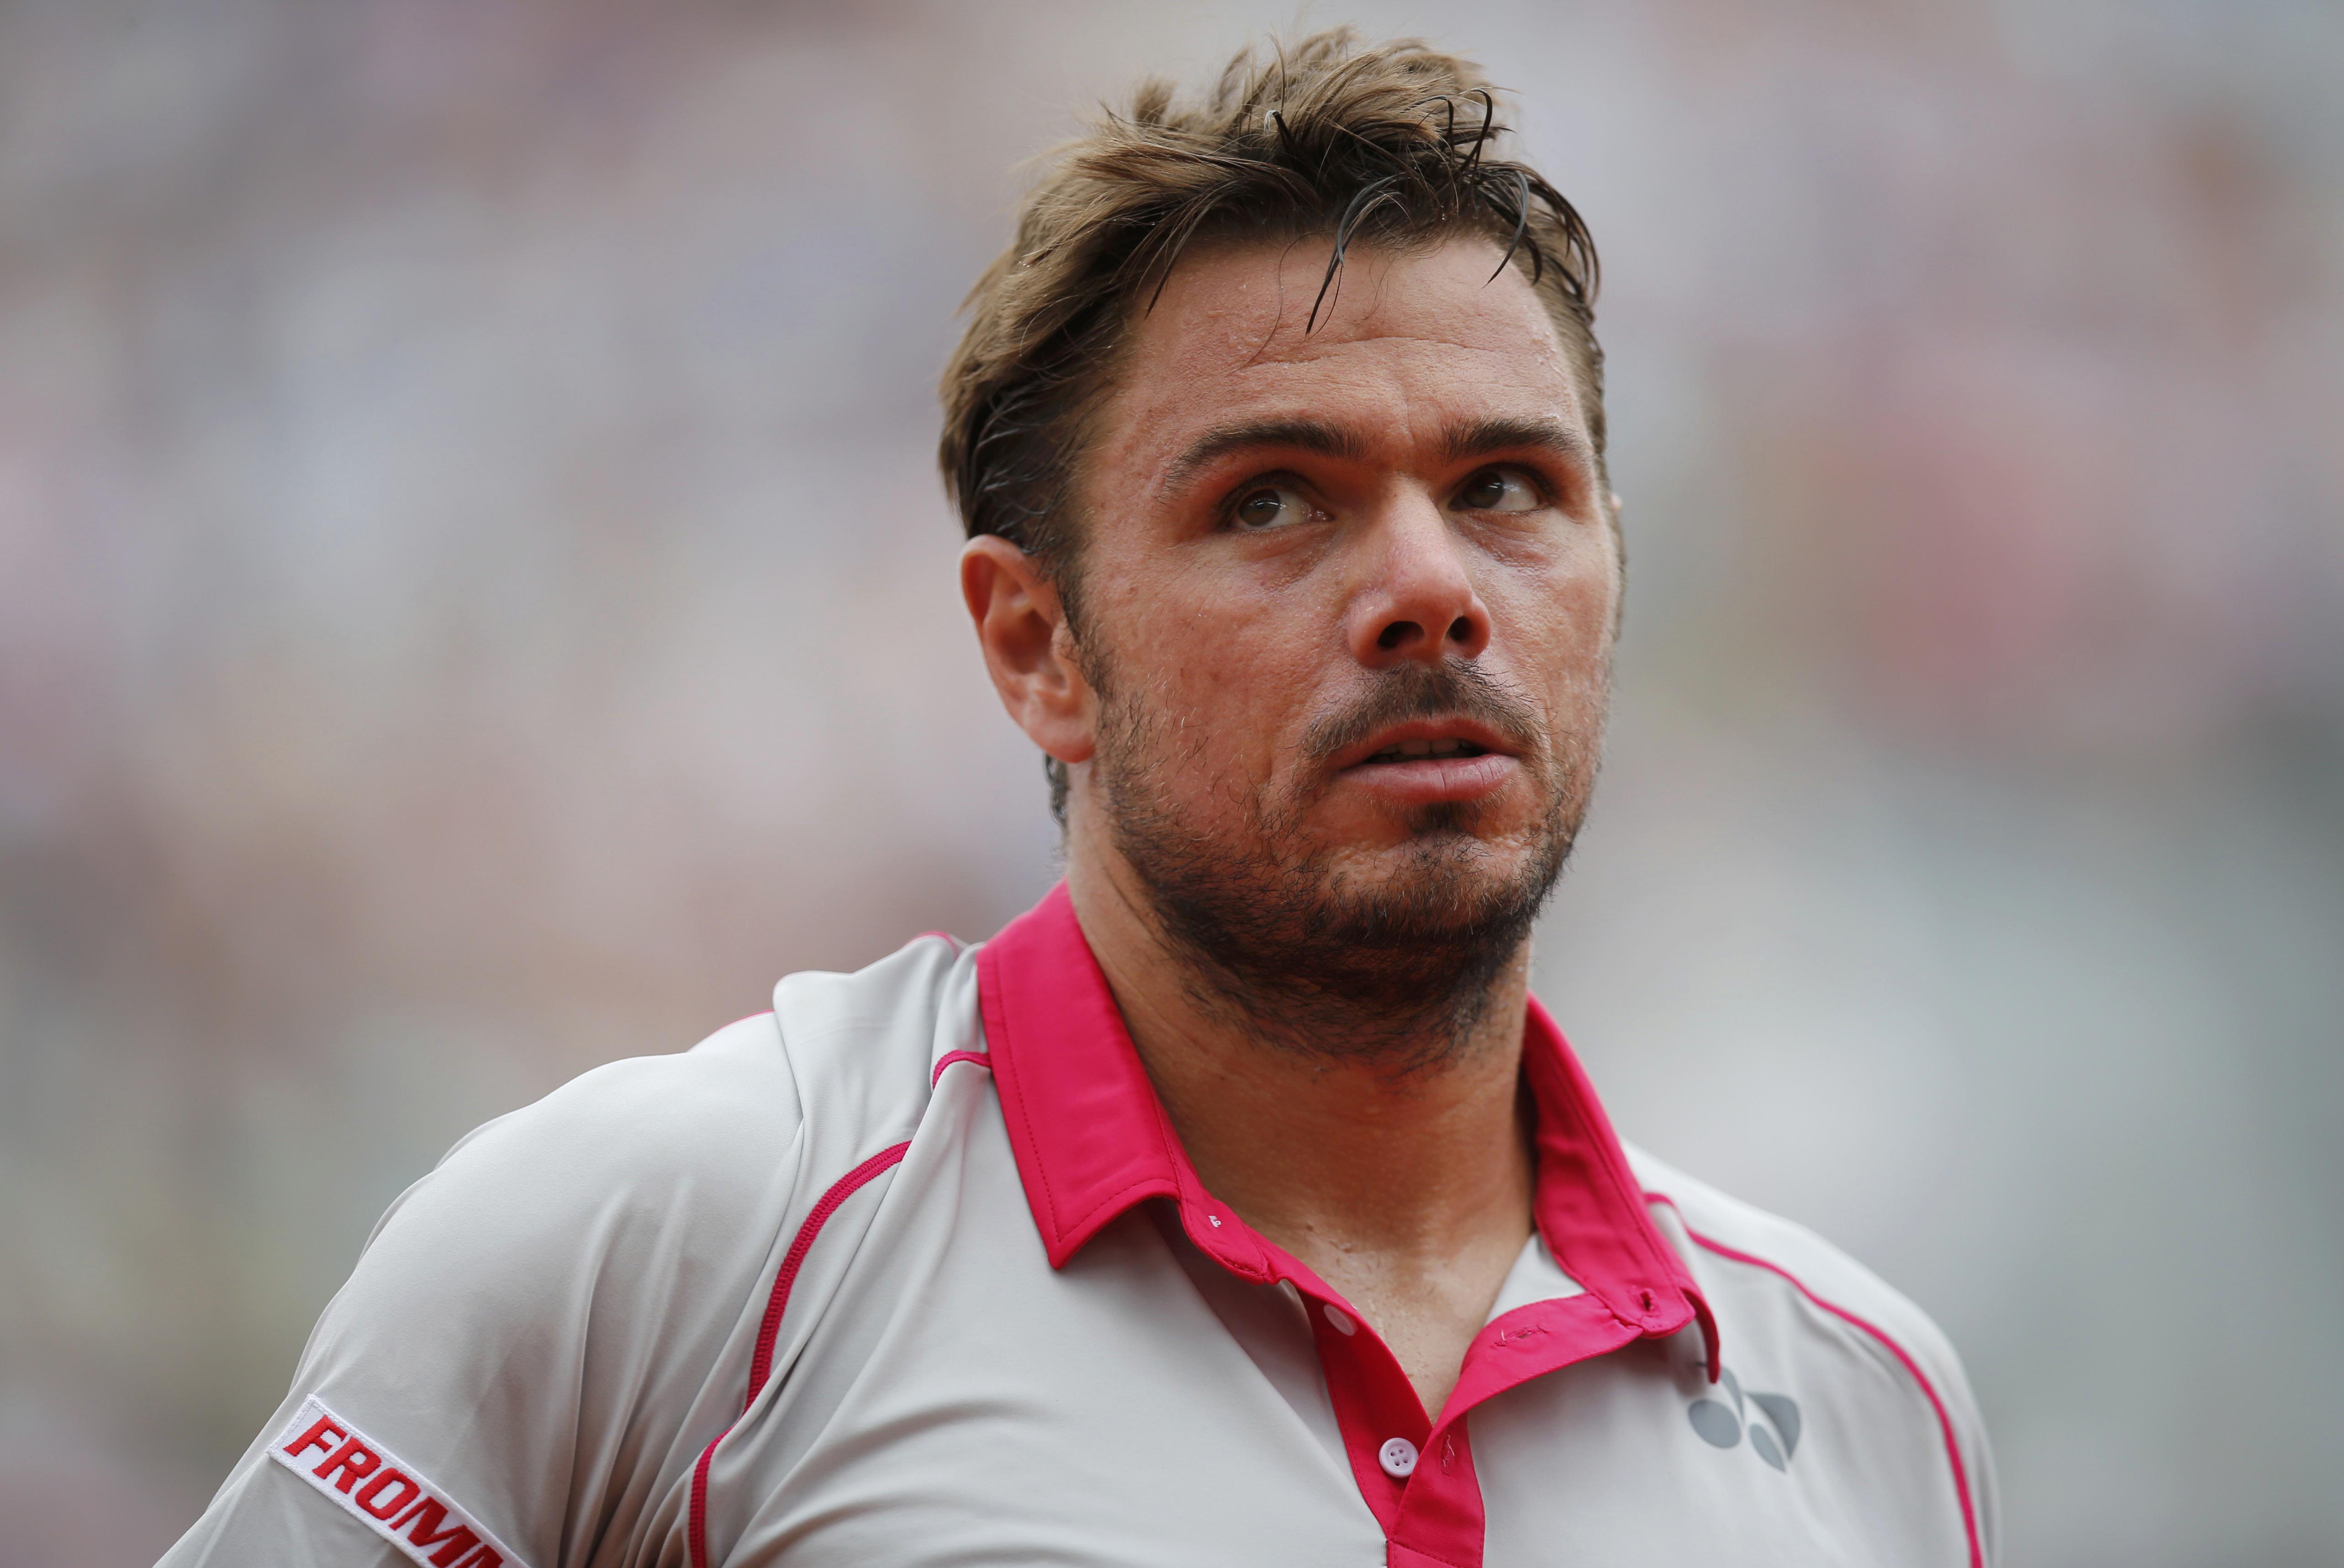 Stan Wawrinka of Switzerland reacts during their men's singles match against Marsel Ilhan of Turkey at the French Open tennis tournament at the Roland Garros stadium in Paris, France, May 24, 2015. REUTERS/Jean-Paul Pelissier